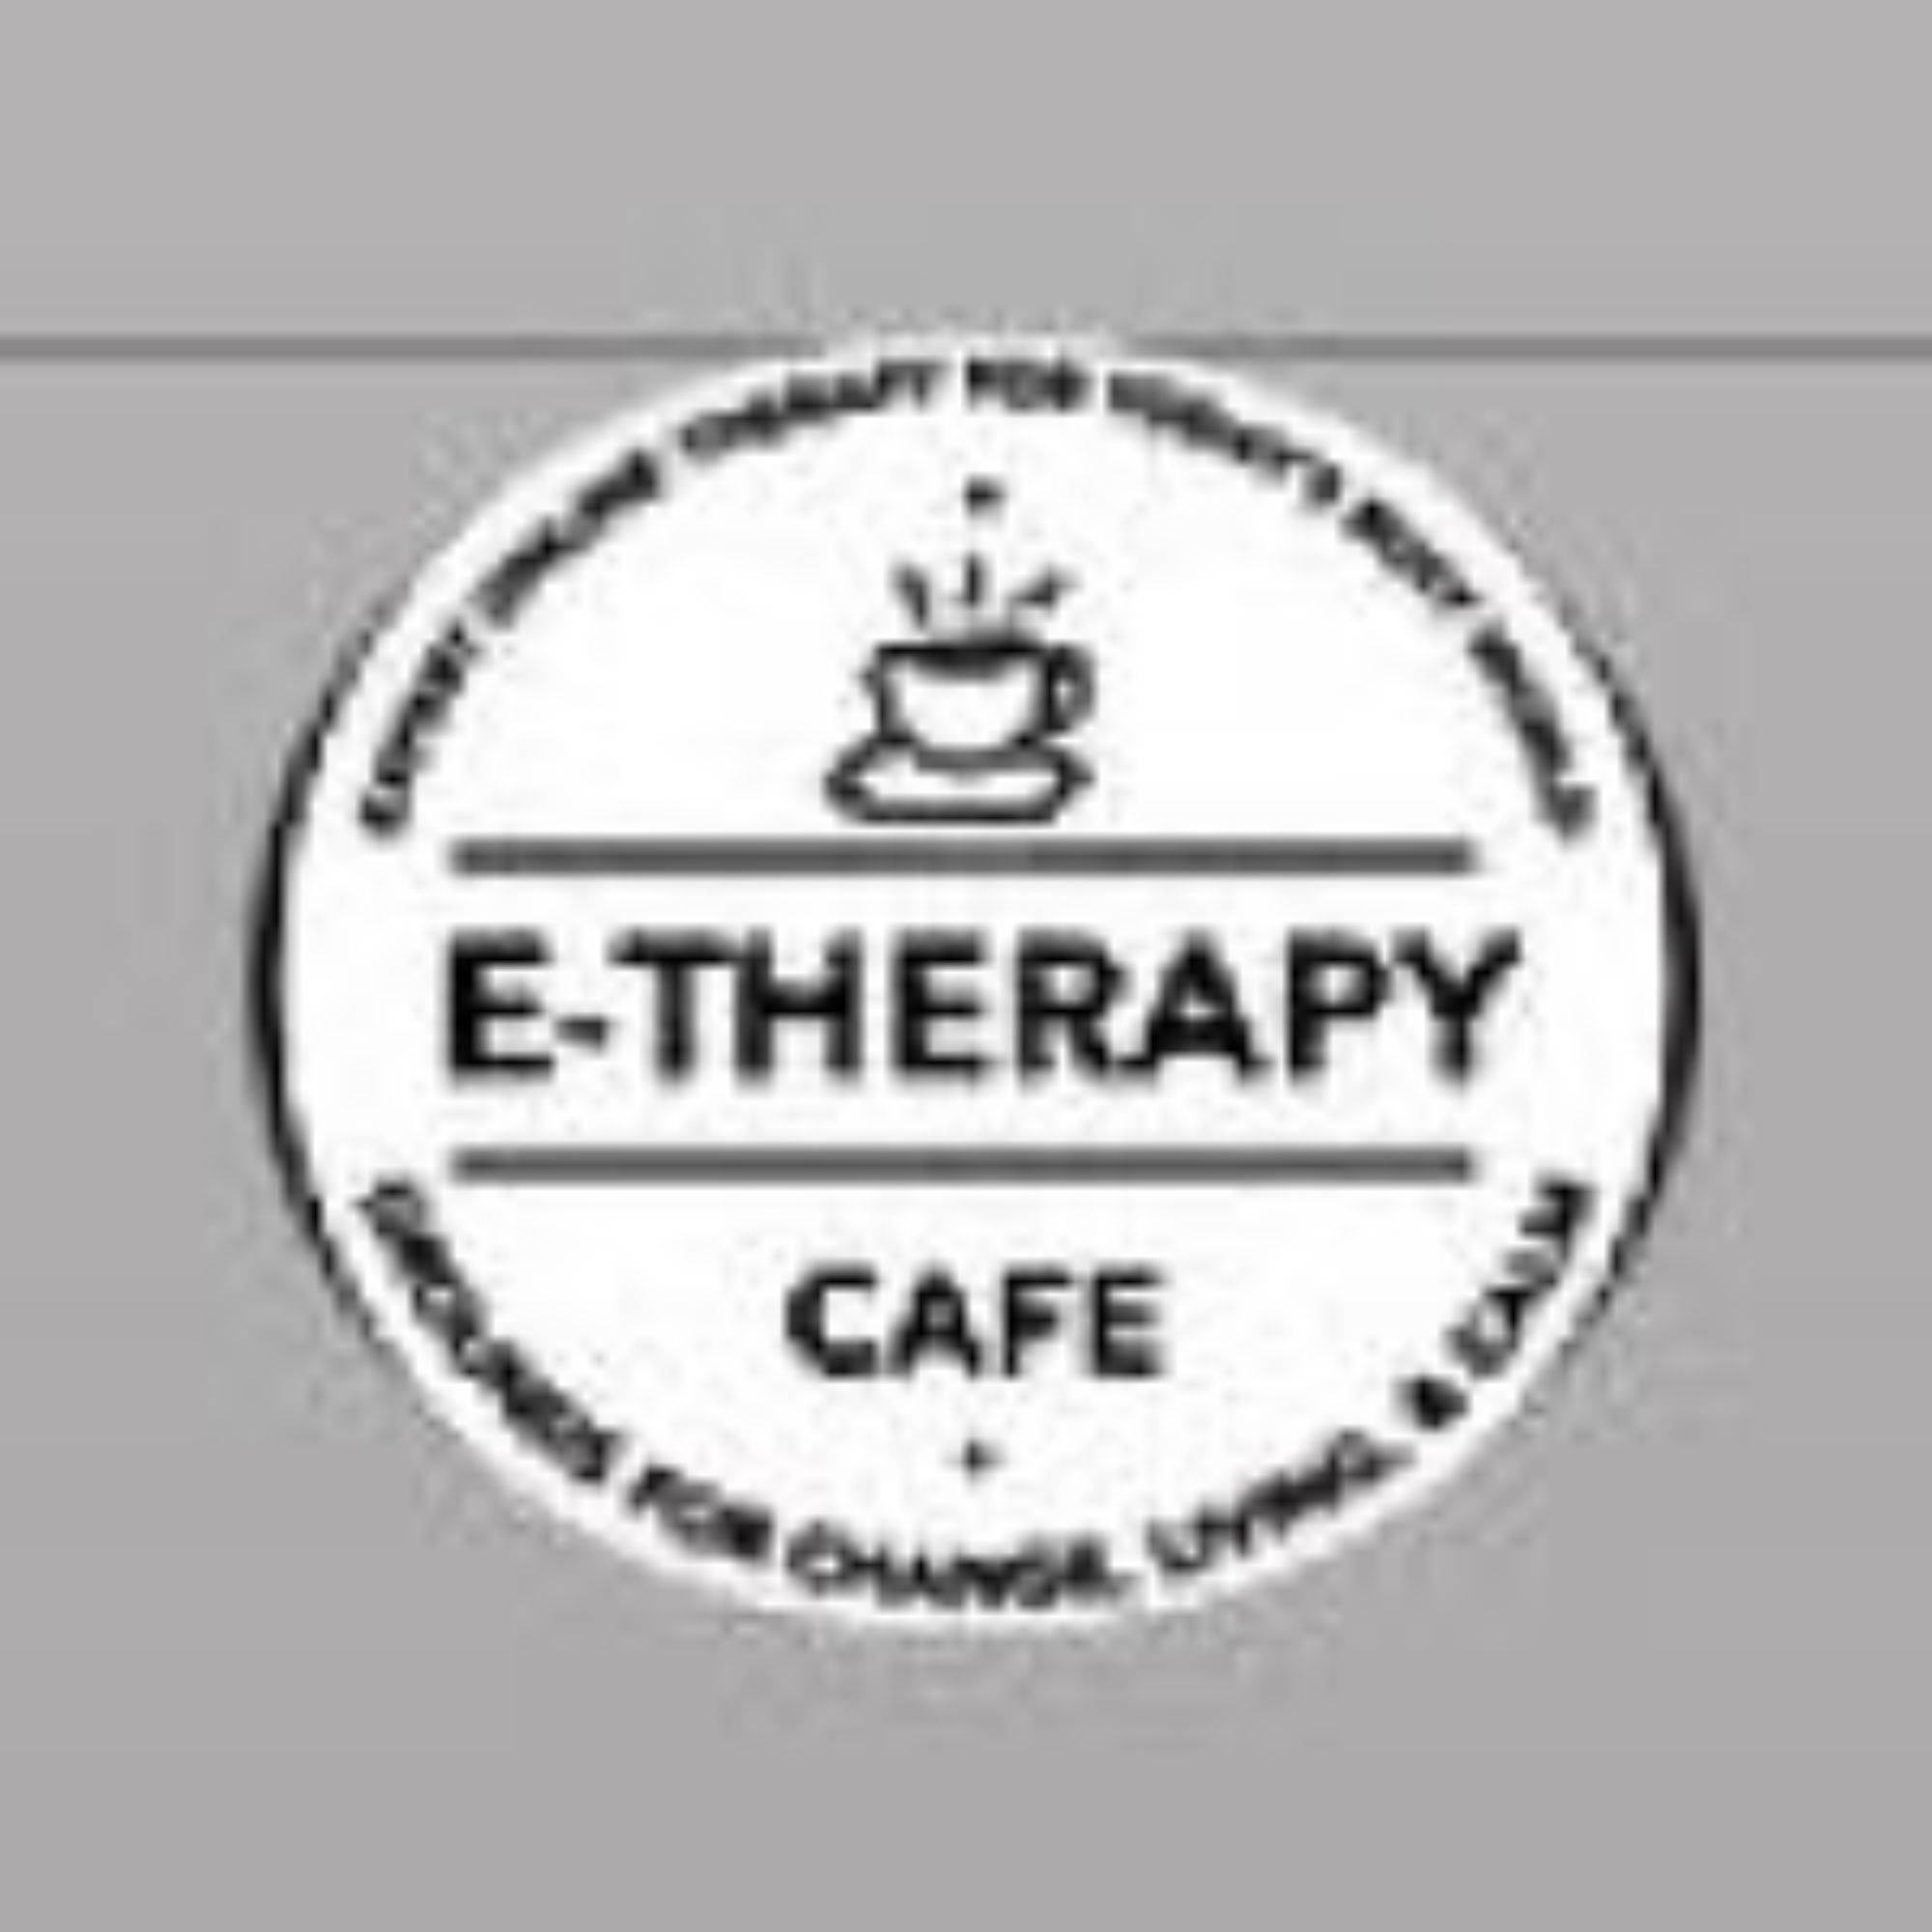 E-Therapy Cafe'